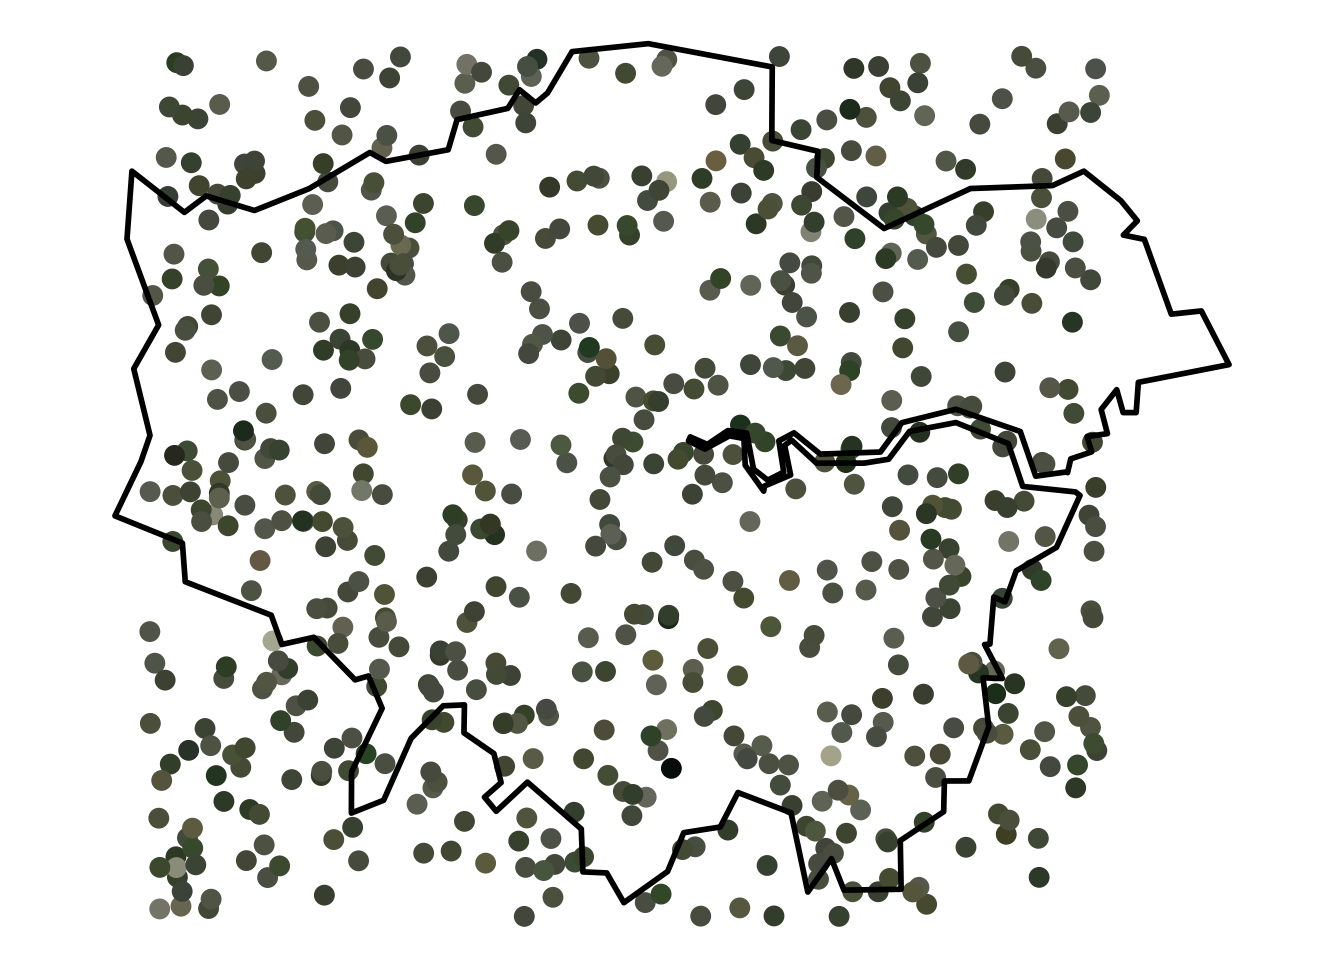 Random points are arranged over a simplified boundary of greater London. Each point represents the location for which the londonmapbot Twitter accoutn tweeted a satellite image. The points are various shades of green through grey, with the colour representing the image via a process of quantization.